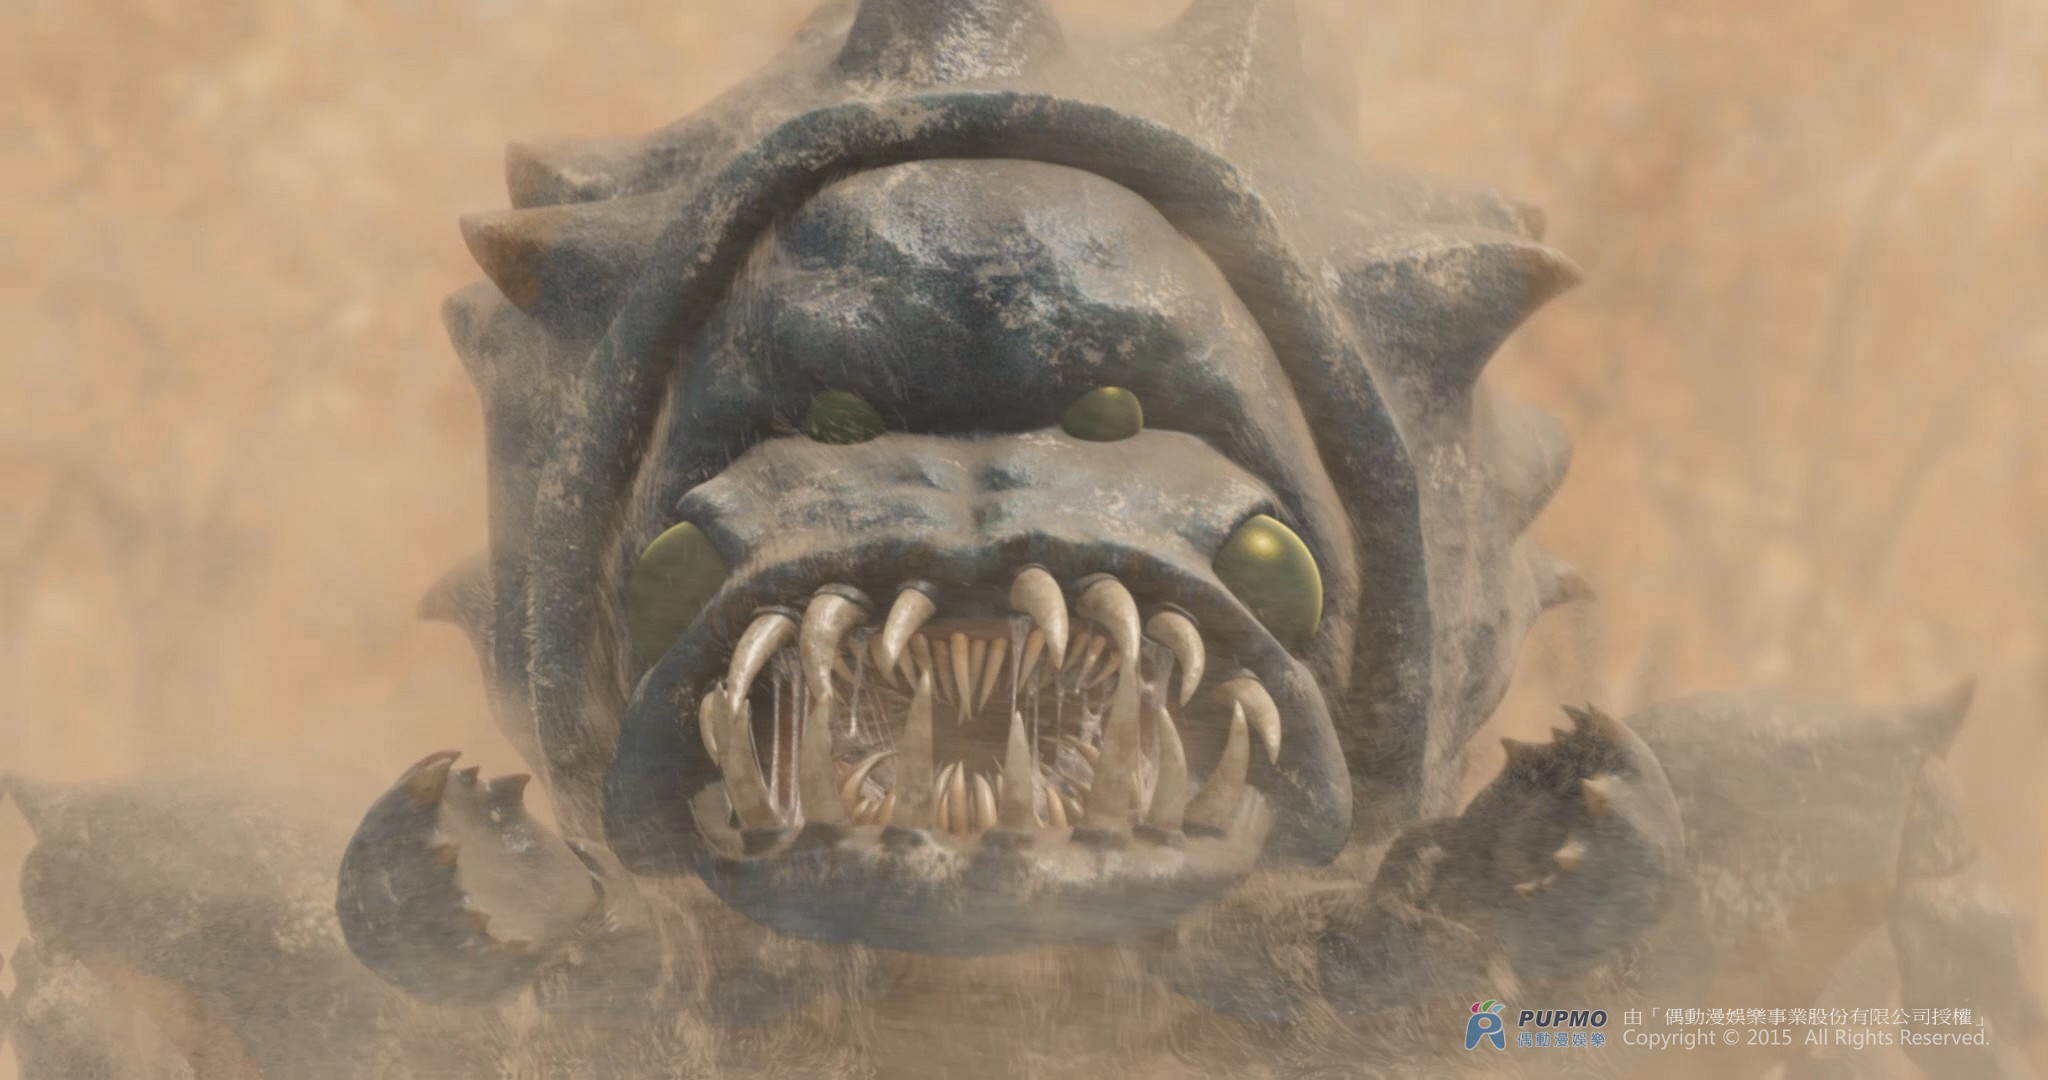 Movie - The Arti : The Adventure Begins - CGI & VFX : sand worm and the dust effect. Click to view large image.